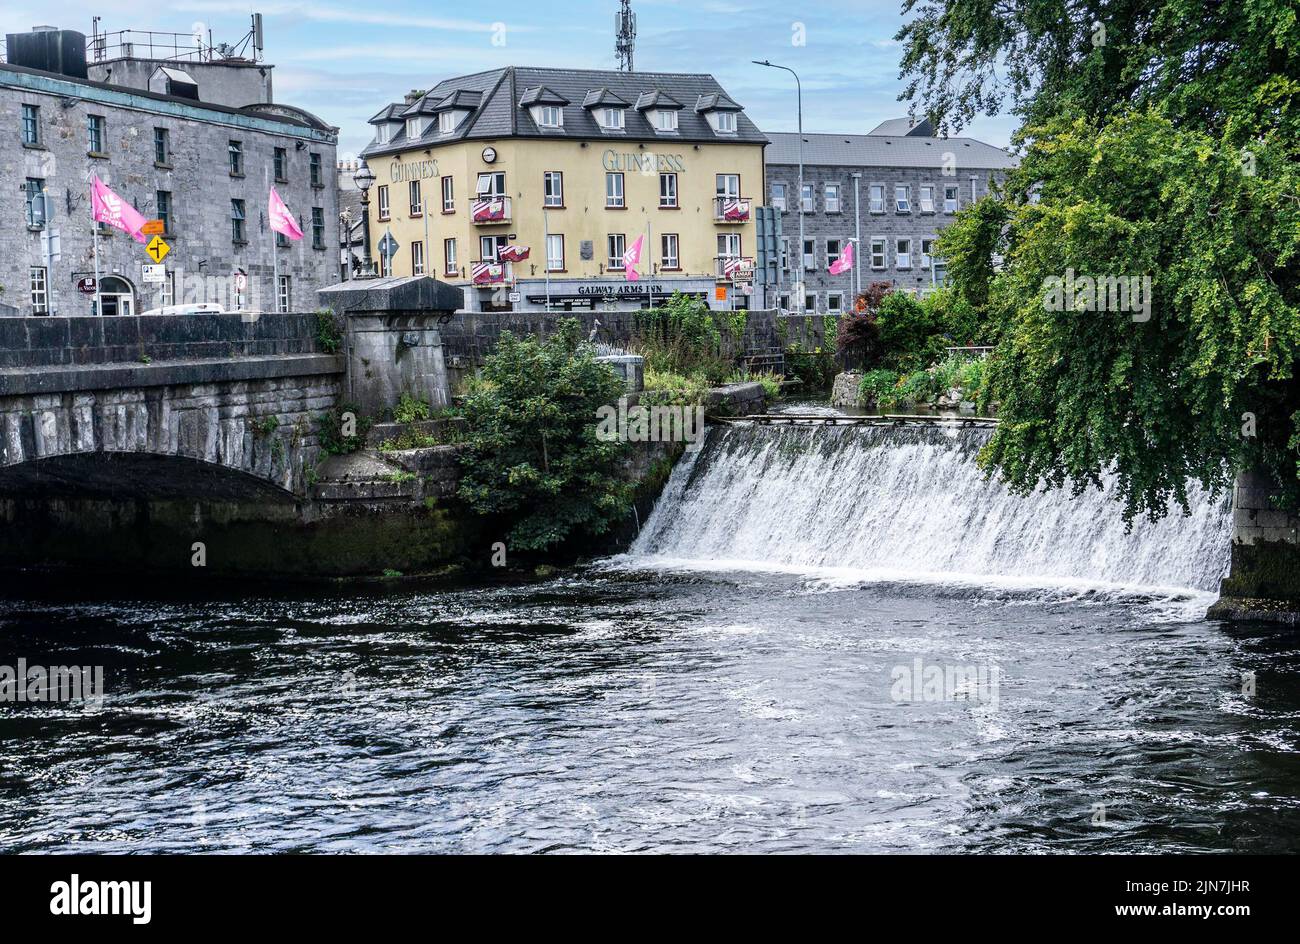 The Corrib River in Galway City with a waterfall on the right and the Galway Arms Inn in the background. Stock Photo